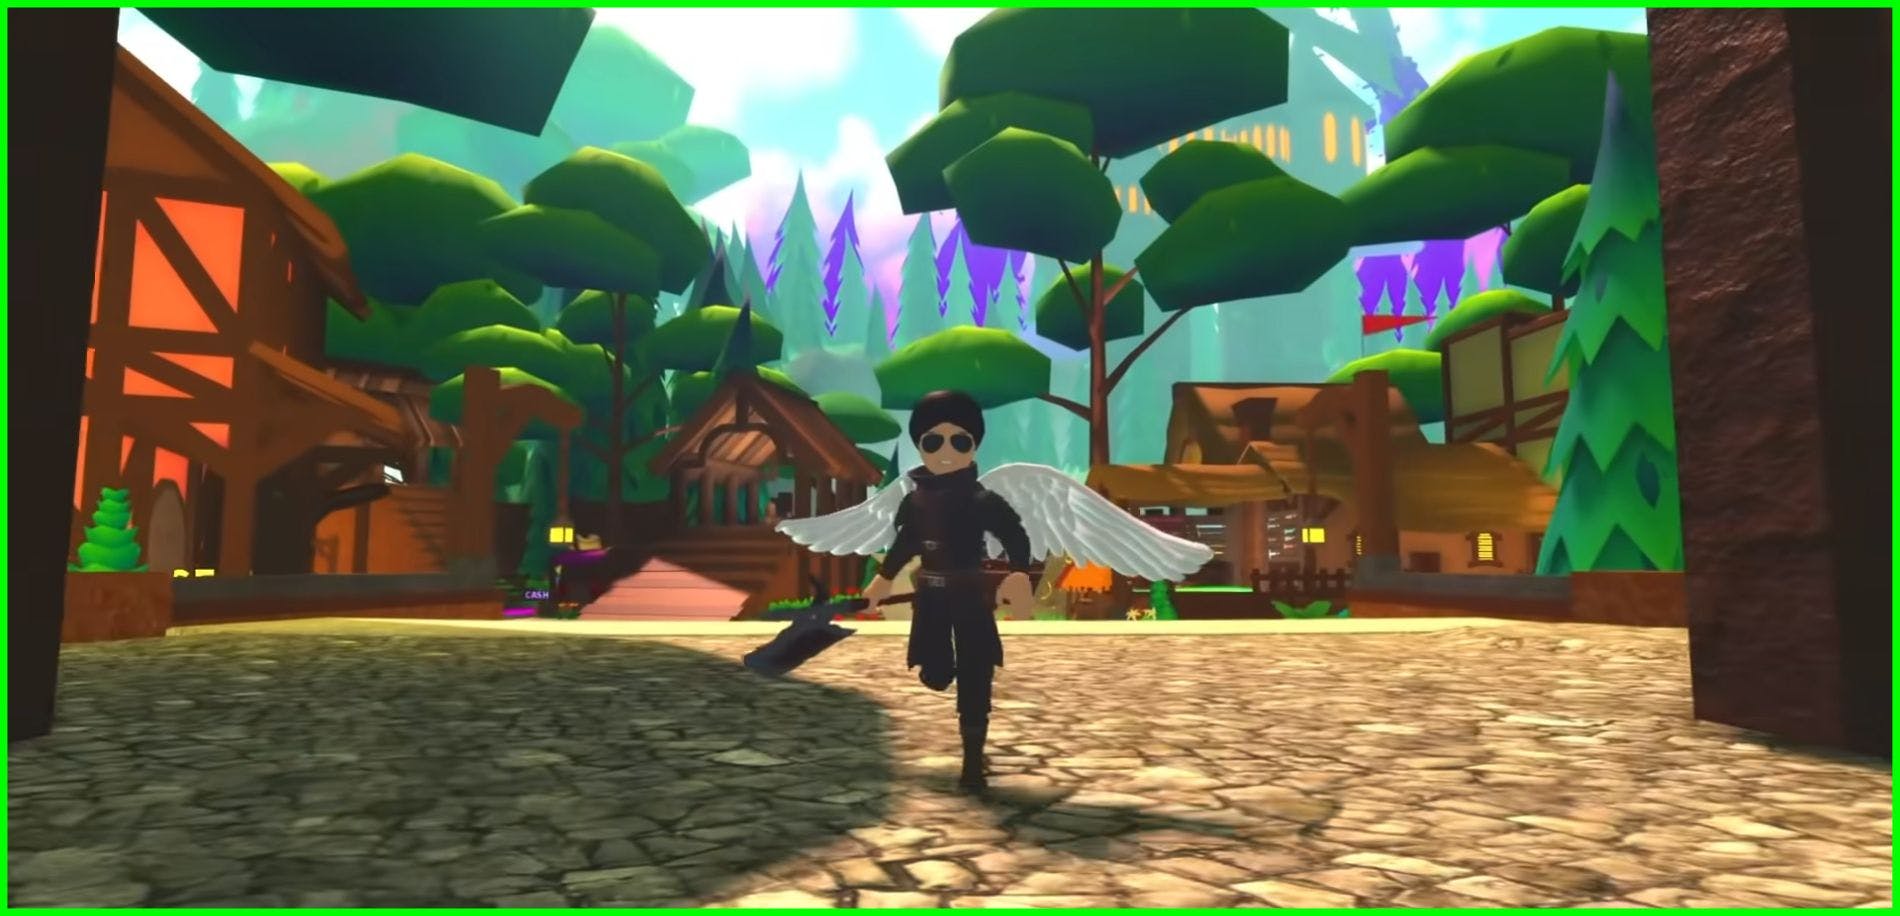 Roblox Lures Users With Improved Metaverse, But They Are Not